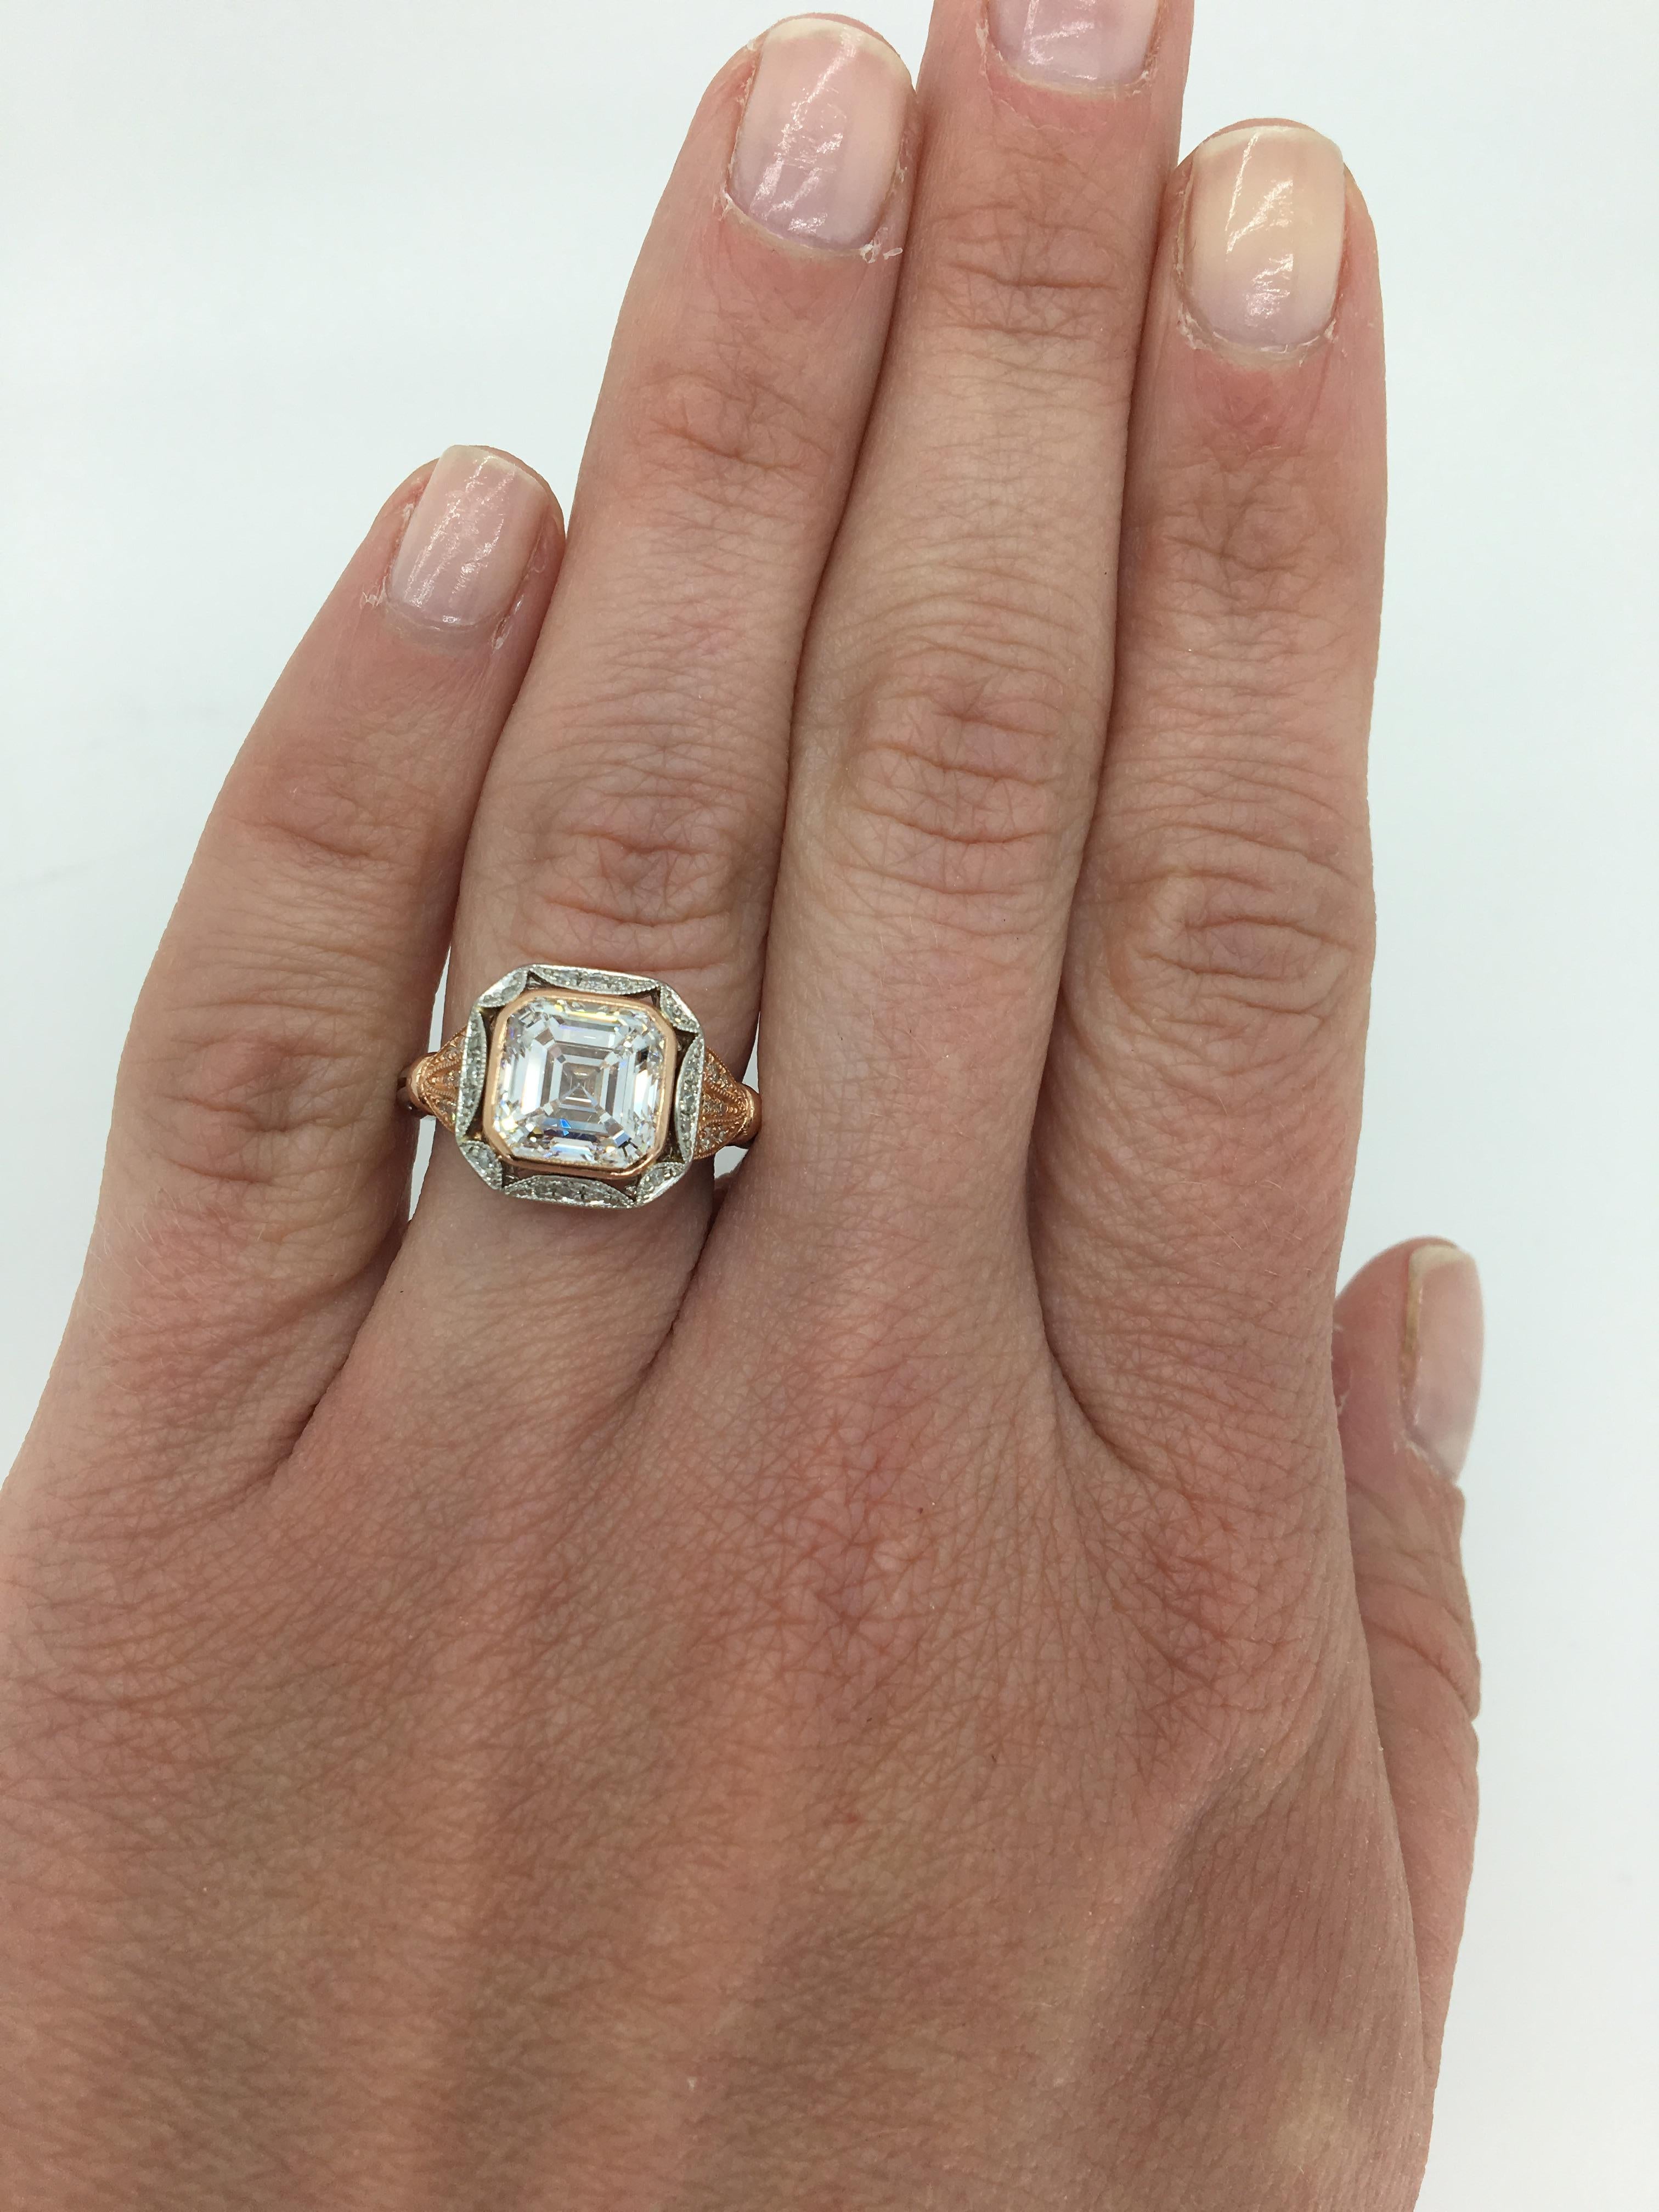 Vintage GIA certified platinum and rose gold halo style 3.01CT diamond ring.

GIA Certified: 2185170366 * COPY OF ELECTRONIC CERTIFICATION ONLY * 
Center Diamond Carat Weight: 3.01CT
Center Diamond Cut: Square Emerald Cut
Center Diamond Color: